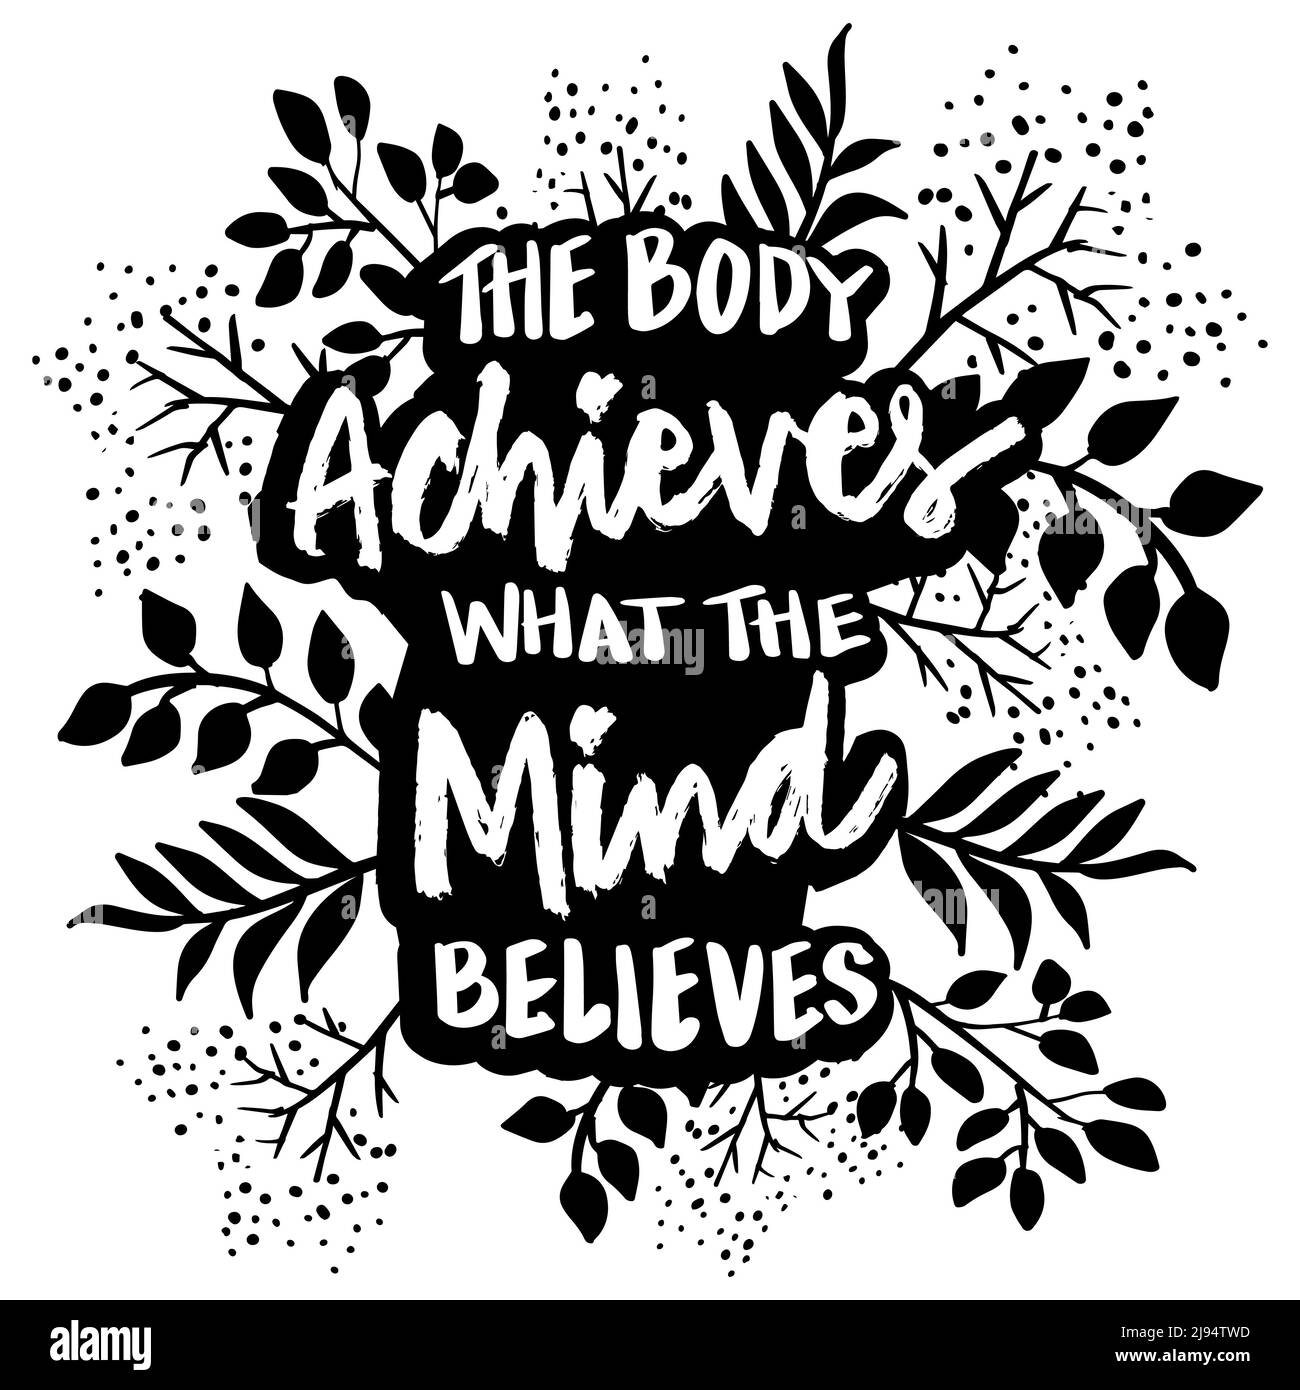 The body achieves what the mind believes. Poster quotes. Stock Photo